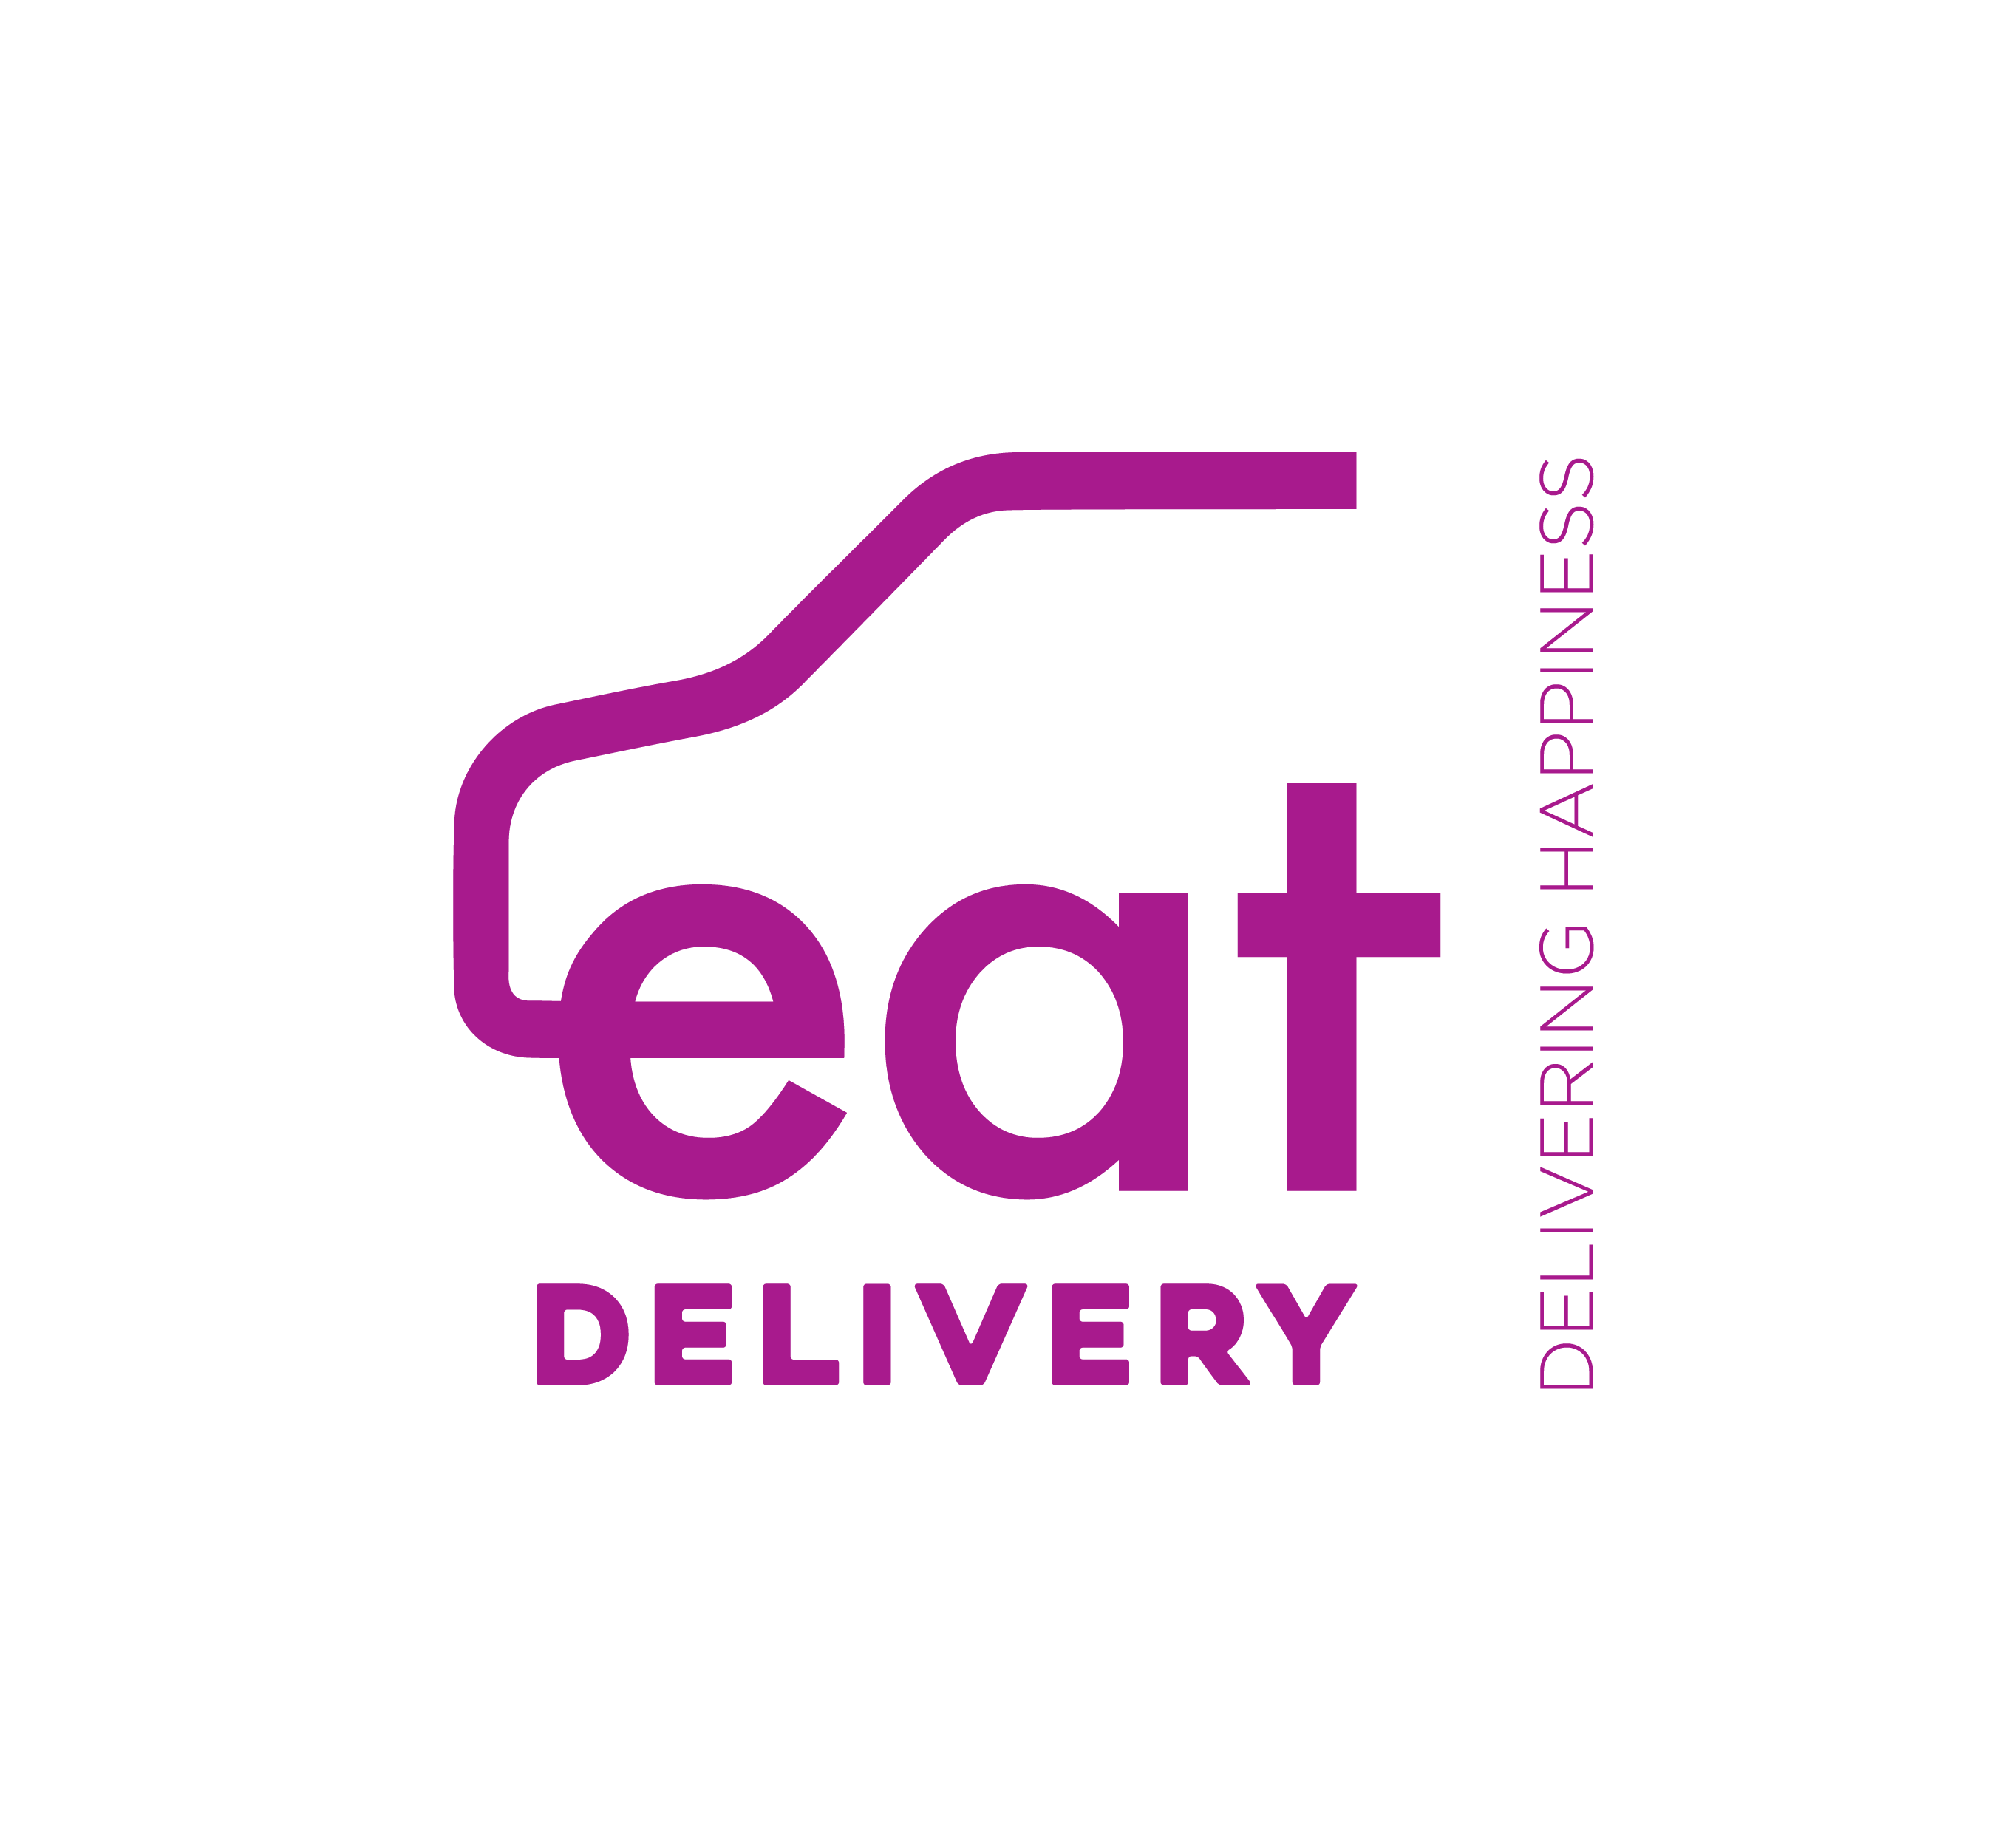 EAT Global Delivery Partners - Eat Delivery